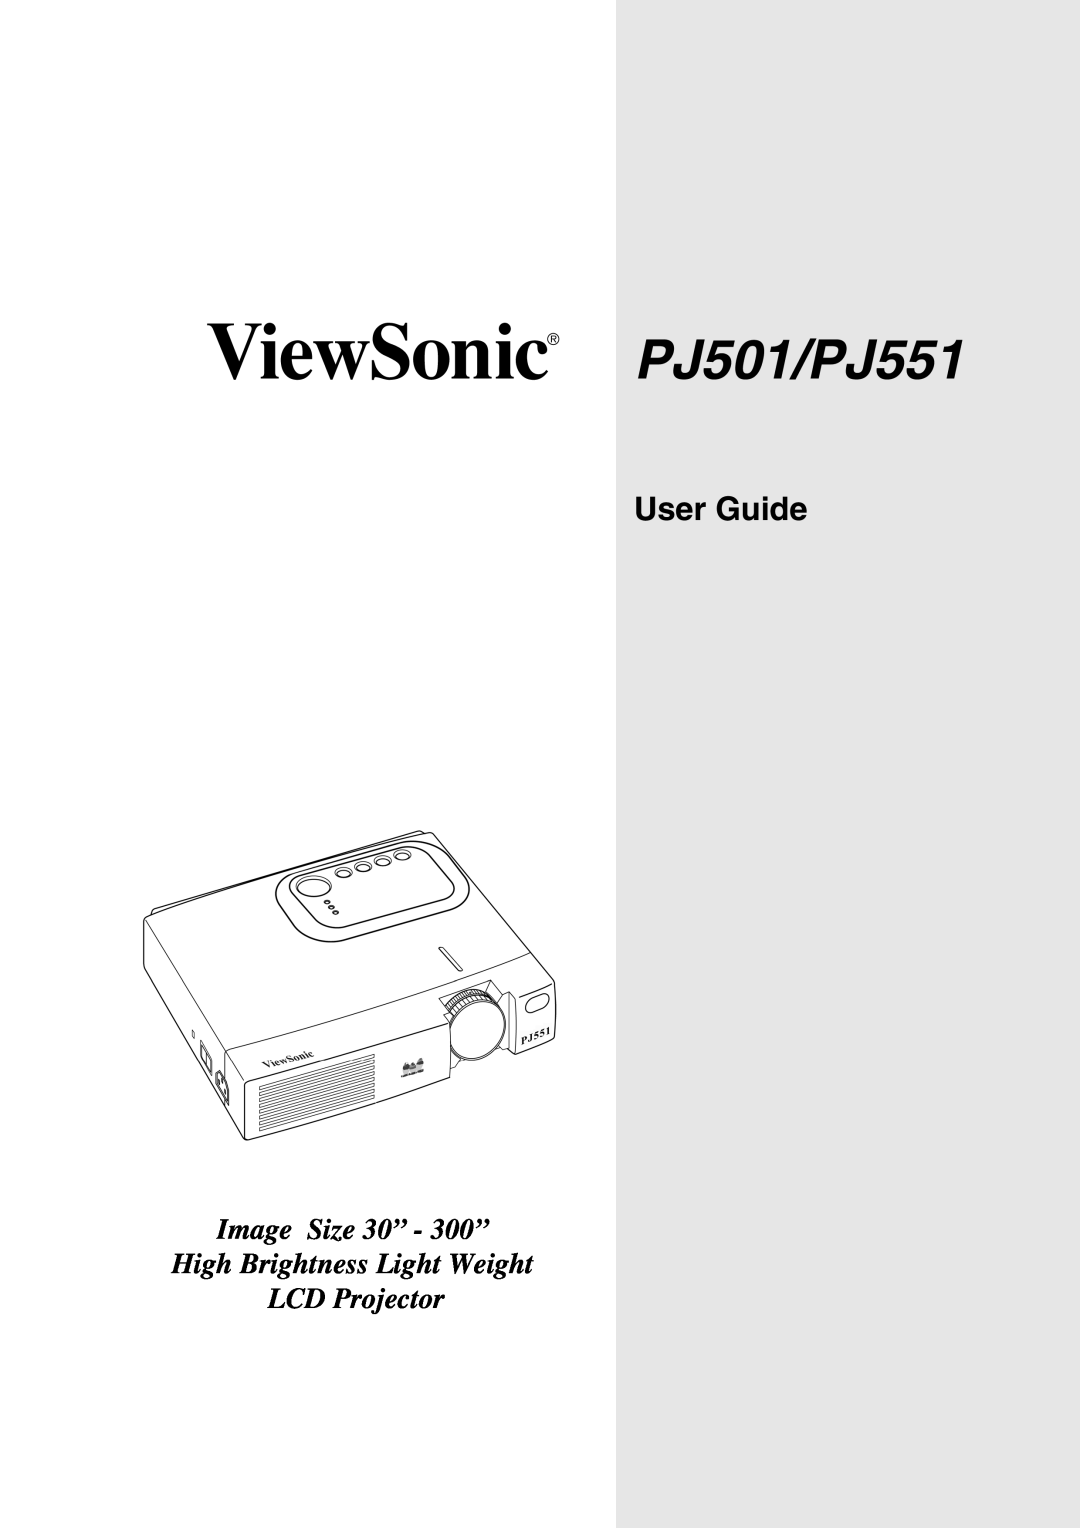 ViewSonic manual User Guide, PJ501/PJ551, Image Size 30” - 300” High Brightness Light Weight LCD Projector 